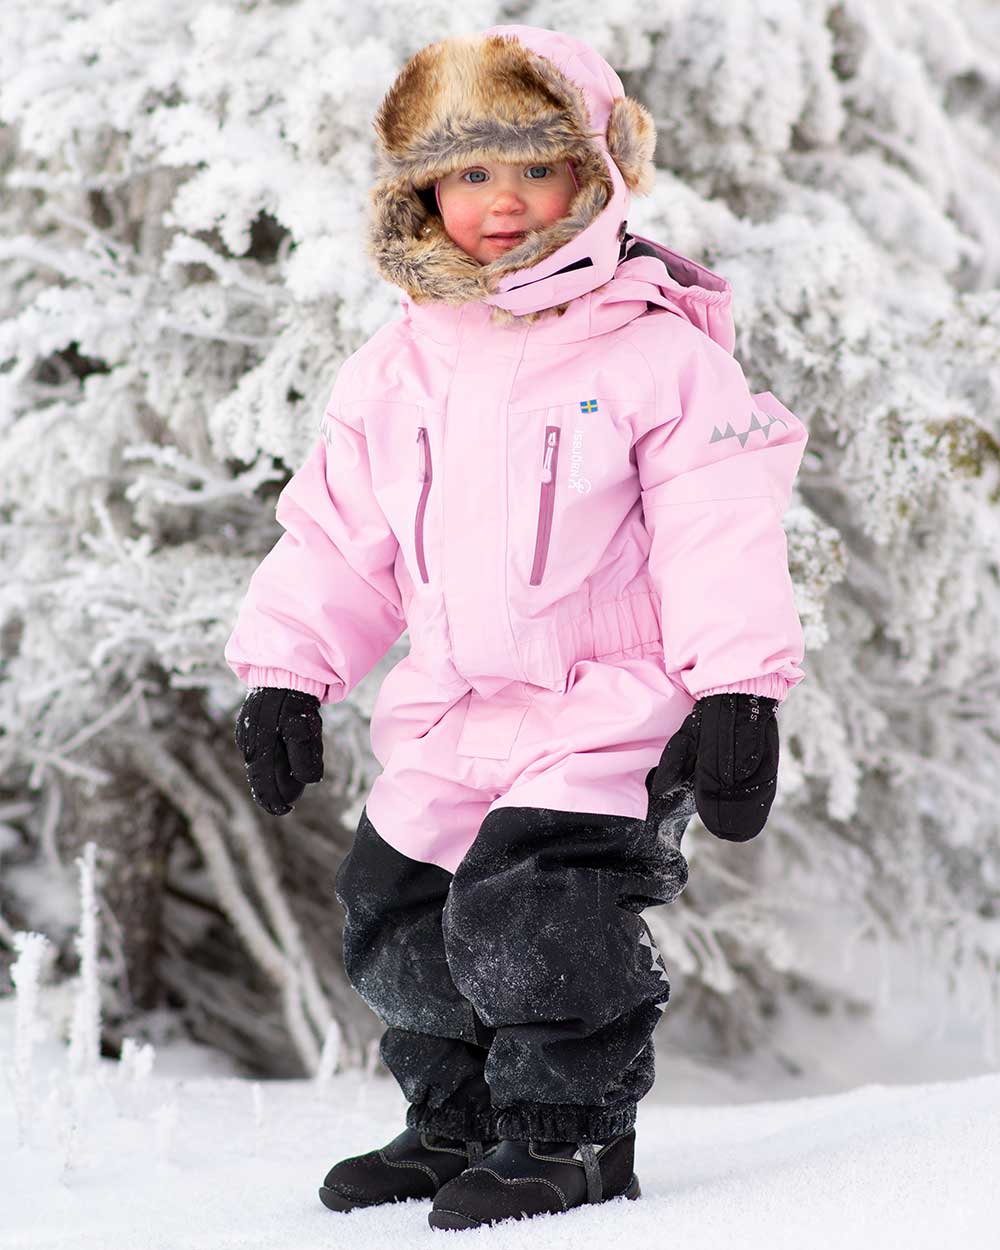 Kids and Toddlers winter clothes